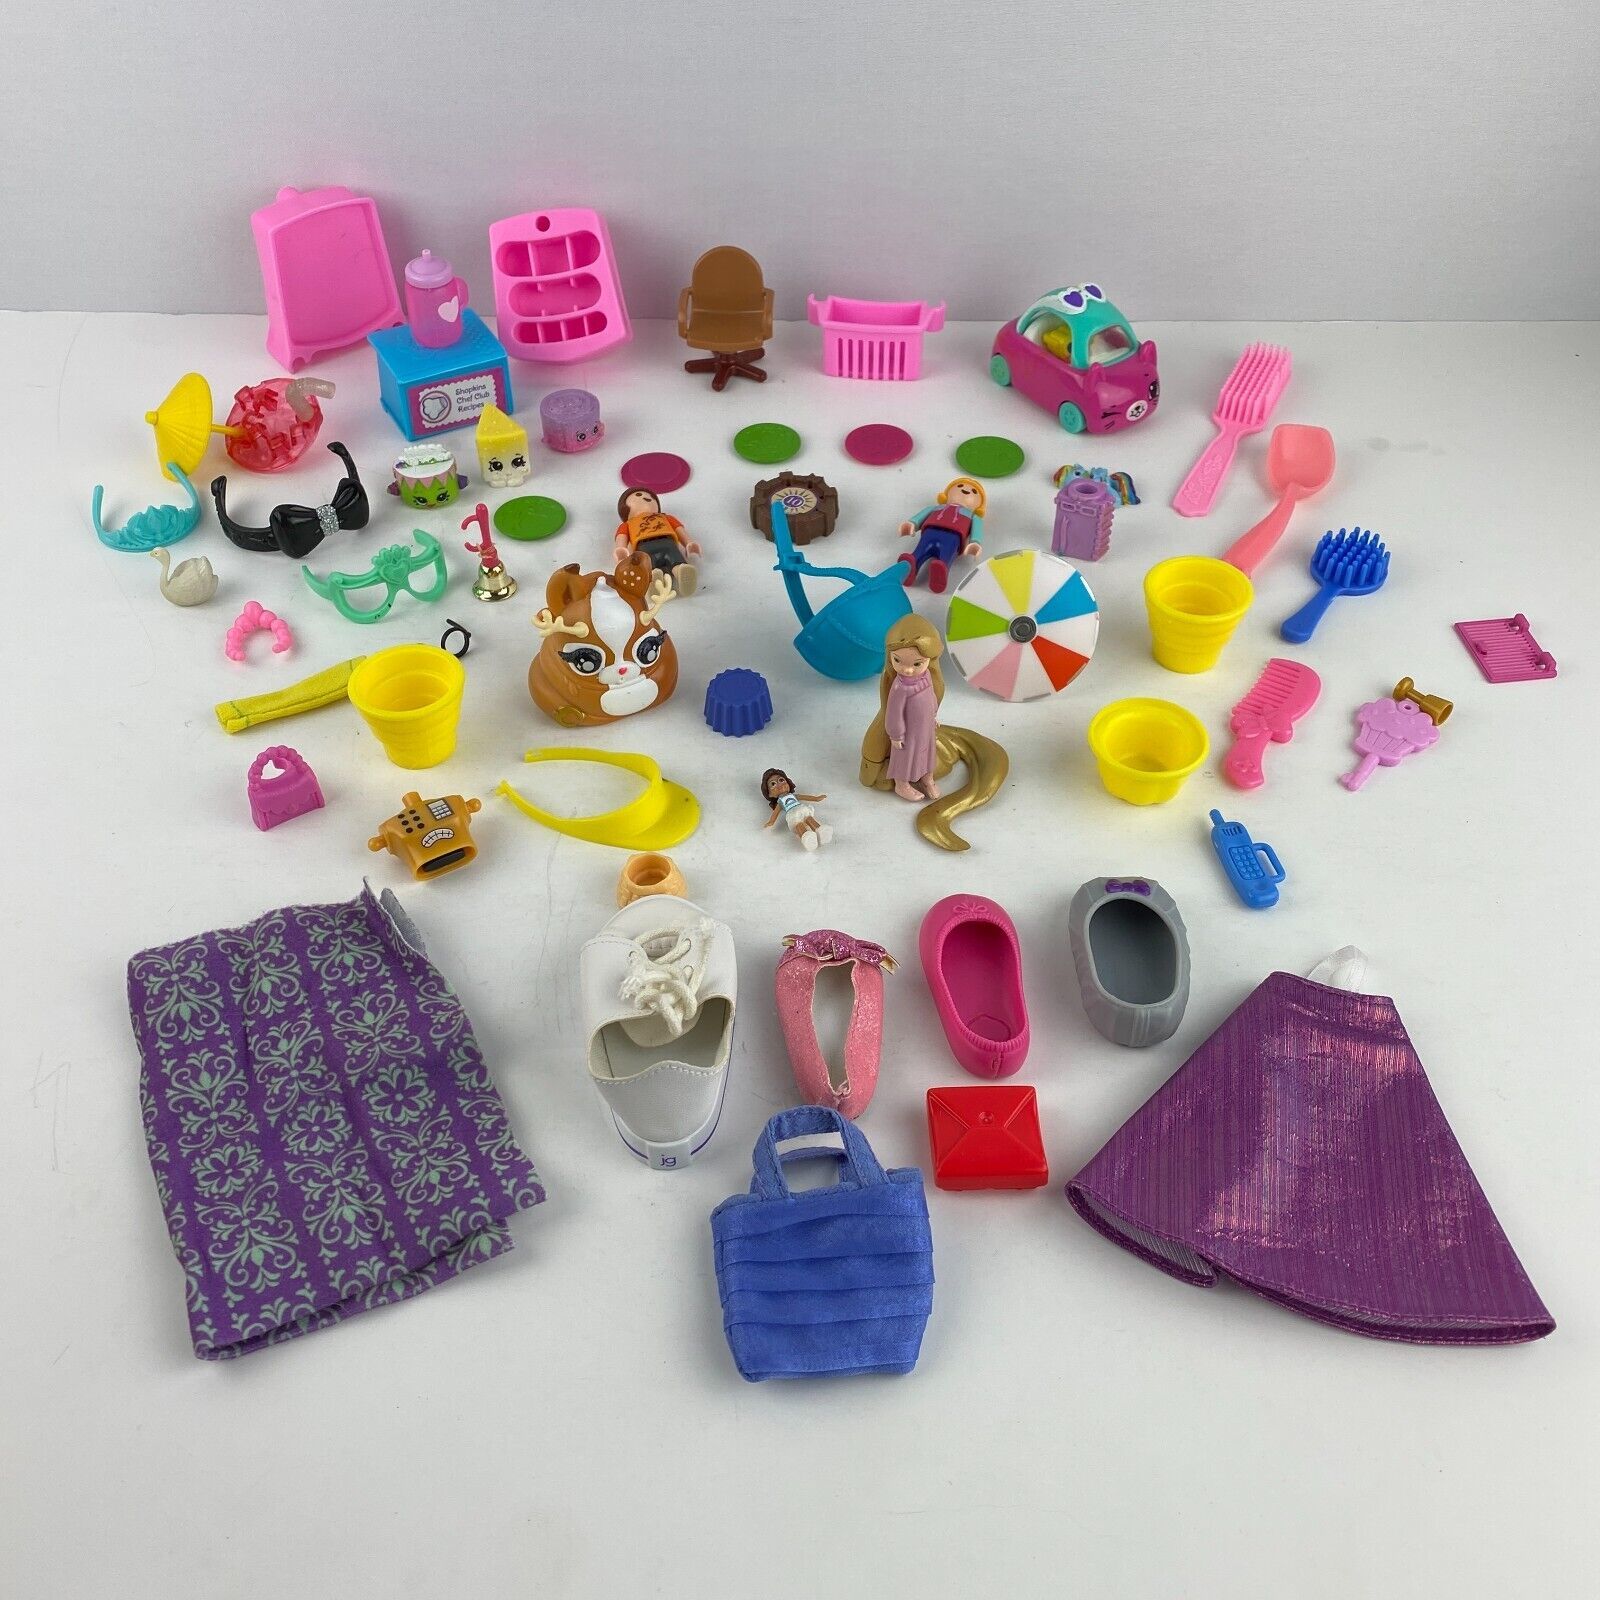 Kids Pretend Play Toy Lot Mix of Many Accessories Playmobil Poopsie Shopkins - $44.99